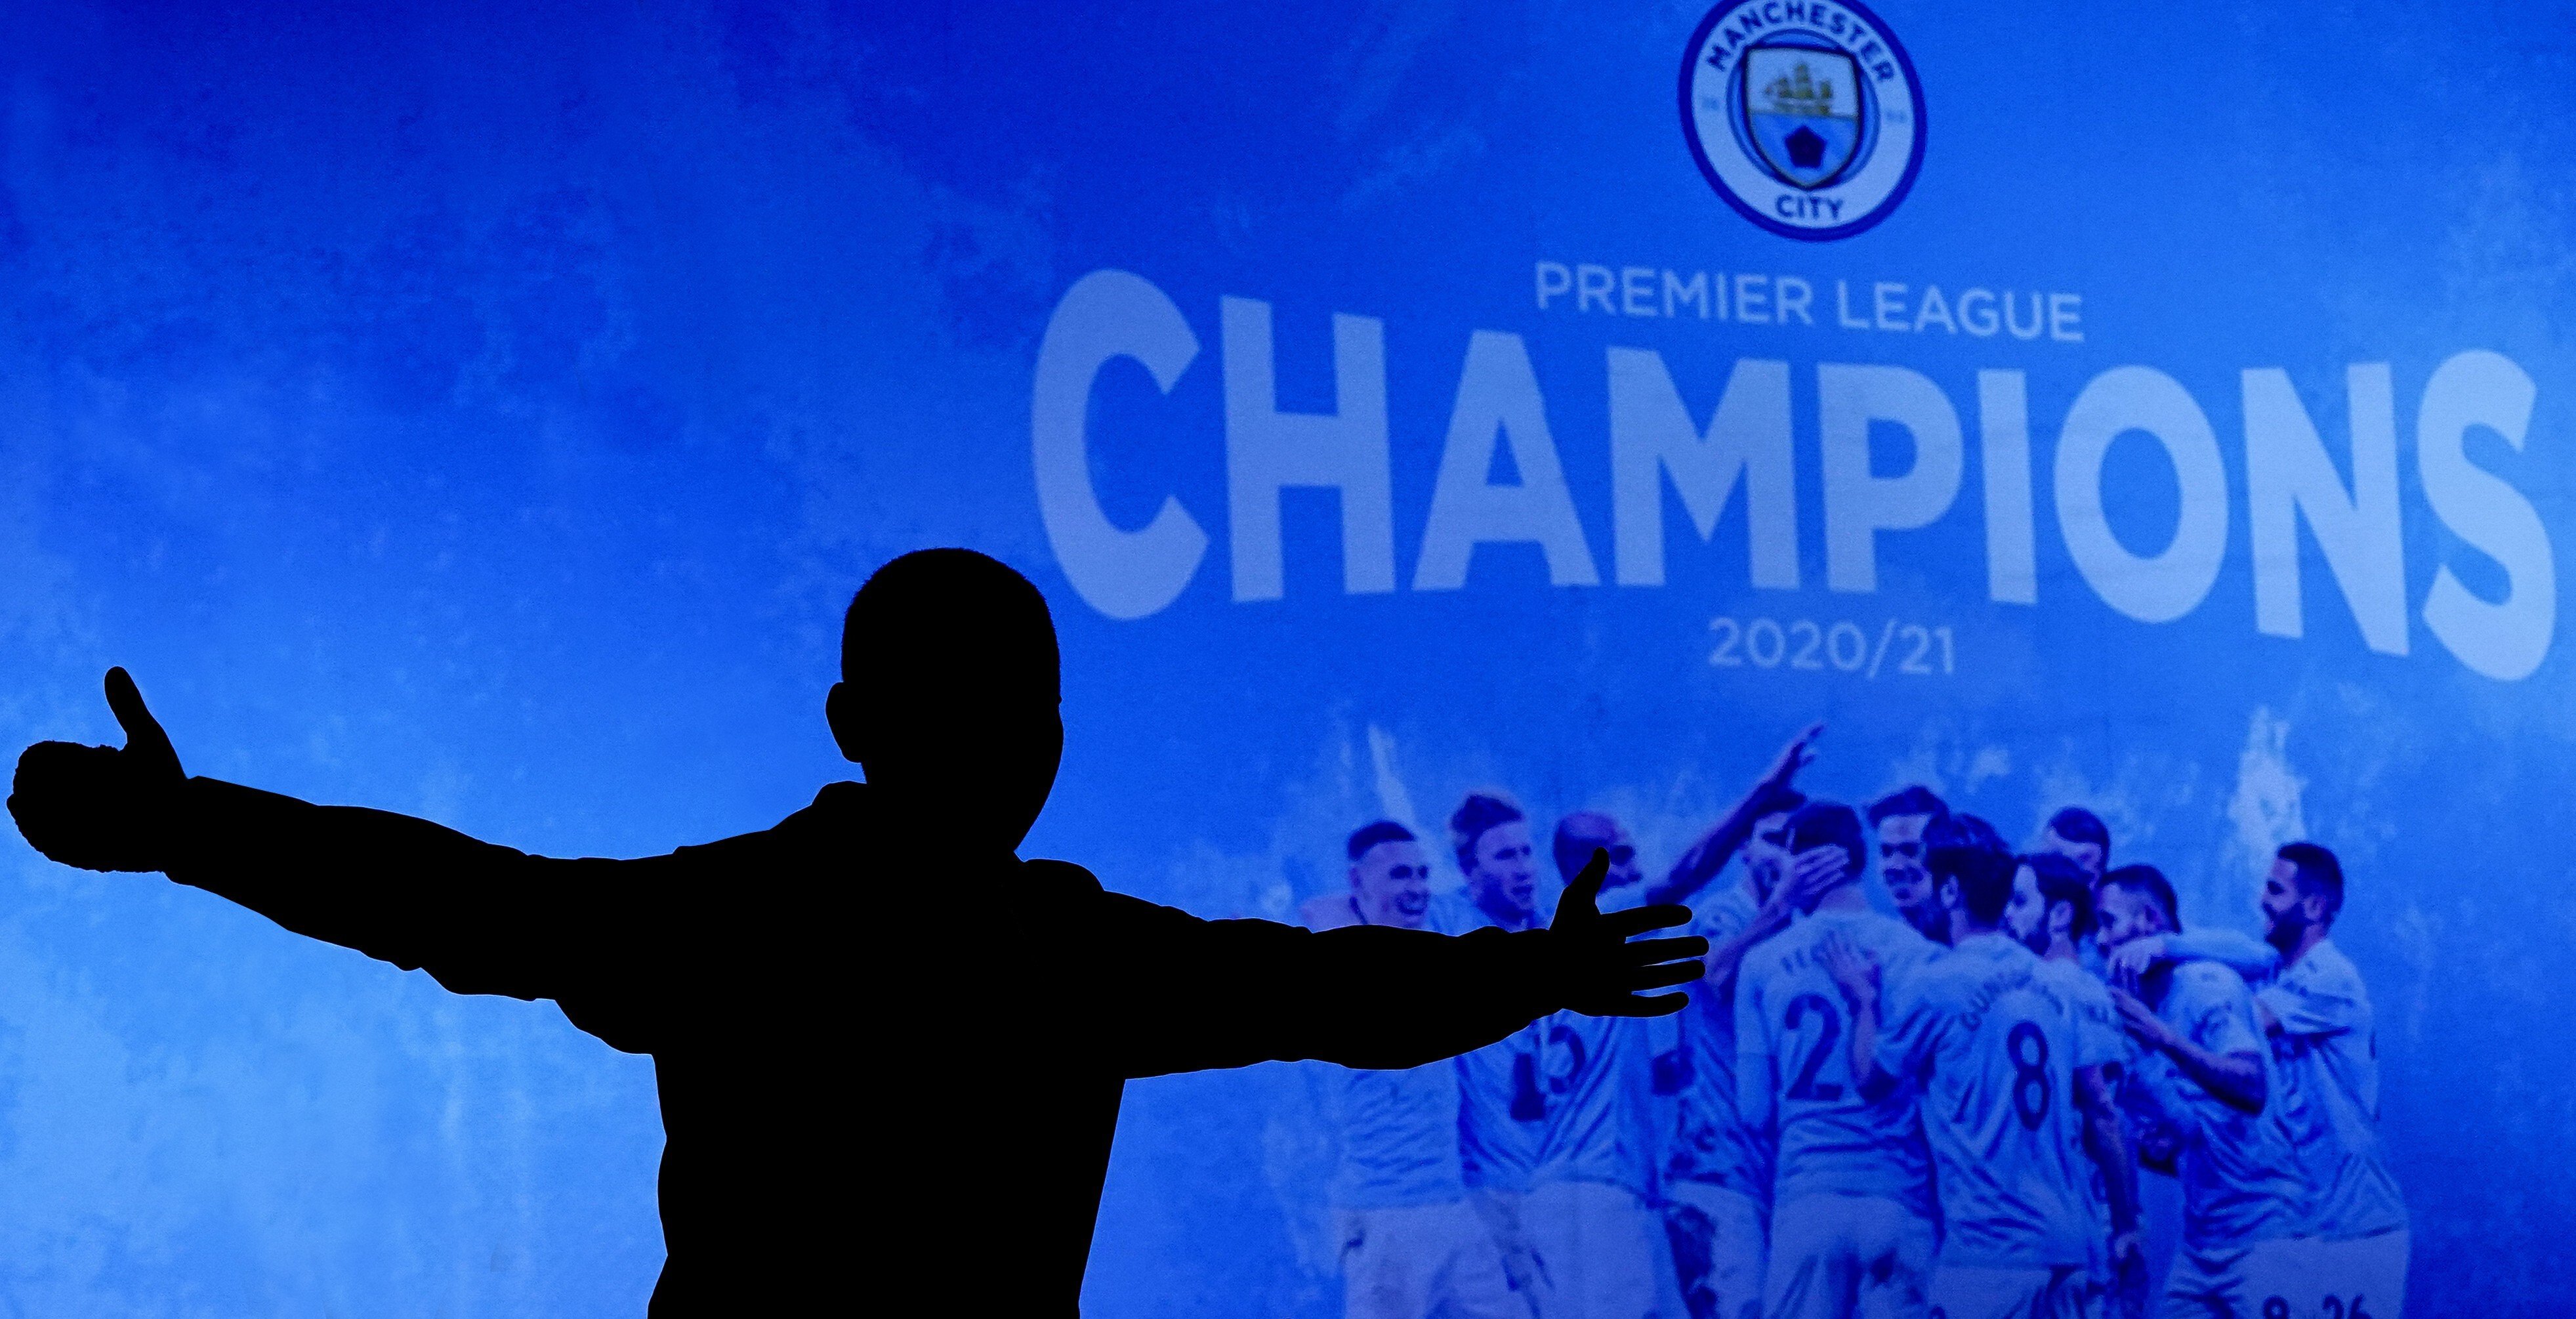 A Manchester City supporter celebrates outside the Etihad Stadium in Manchester after his team clinched the English Premier League title. Photo: AP